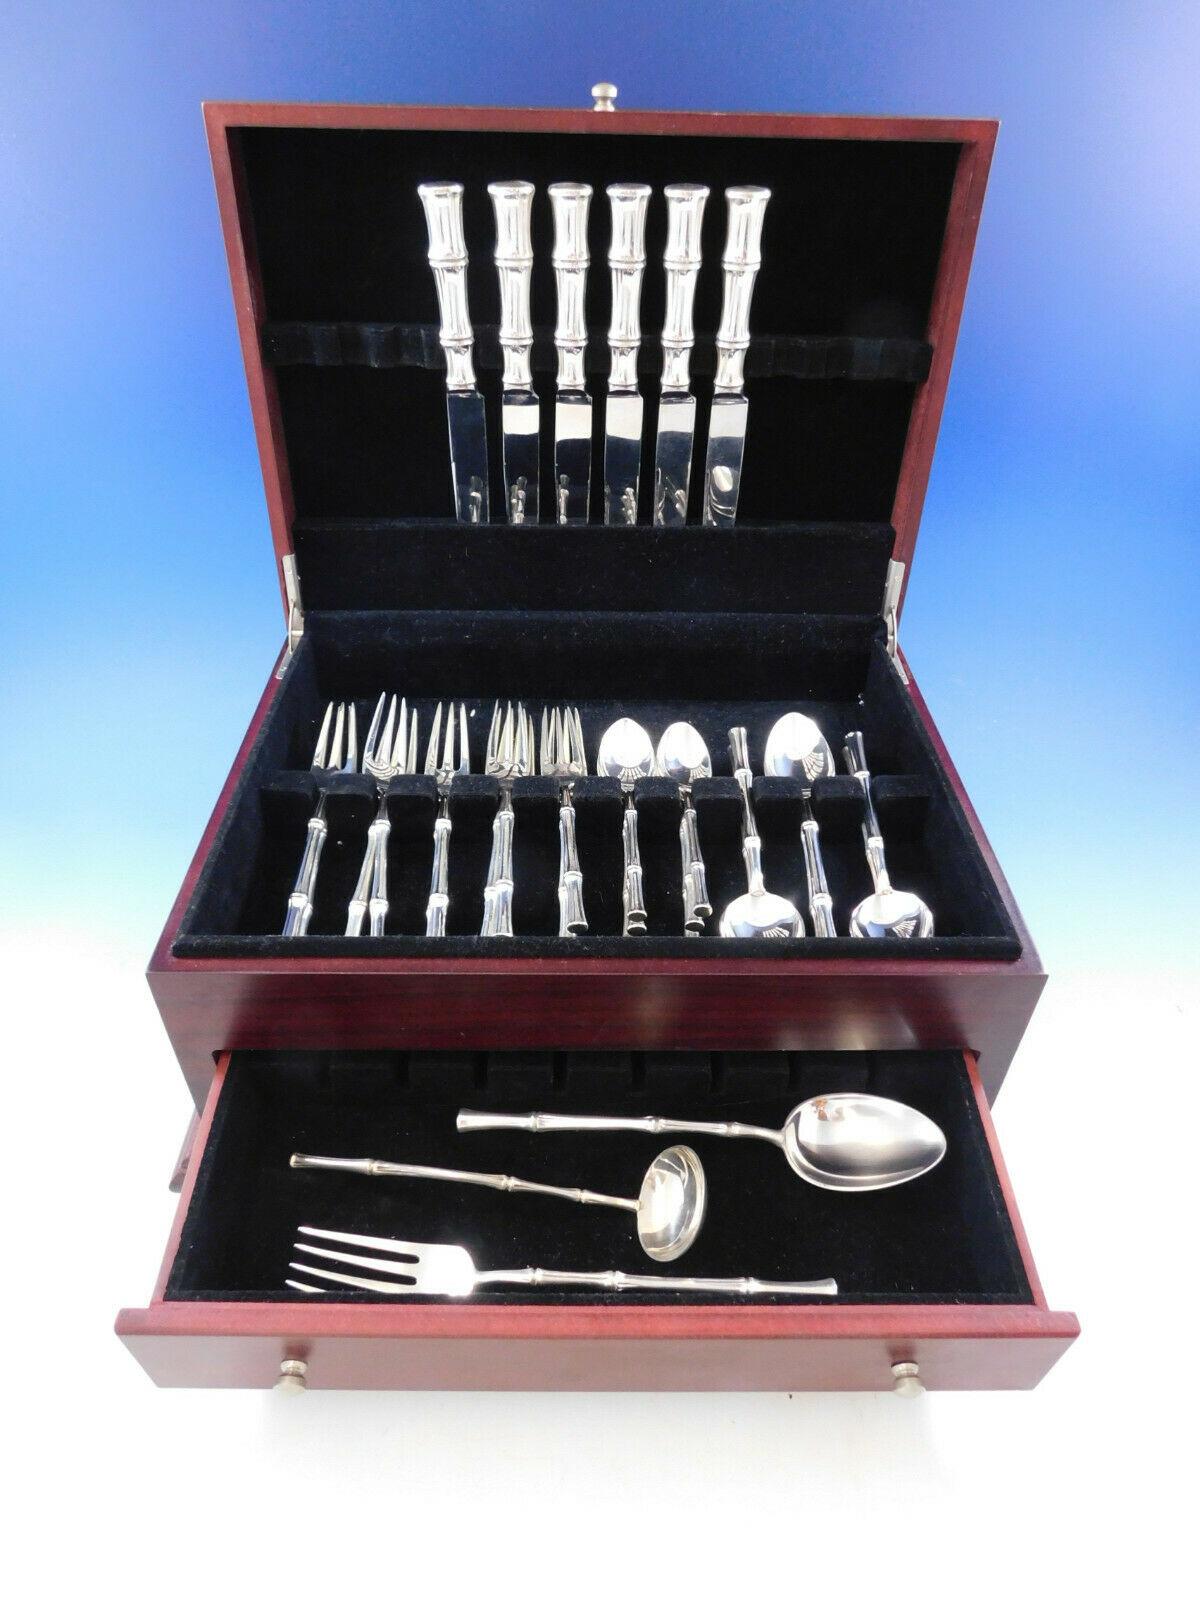 Dinner size bamboo by Tiffany and Co. sterling silver flatware set, 33 pieces. This set includes:

6 dinner knives, 9 3/8